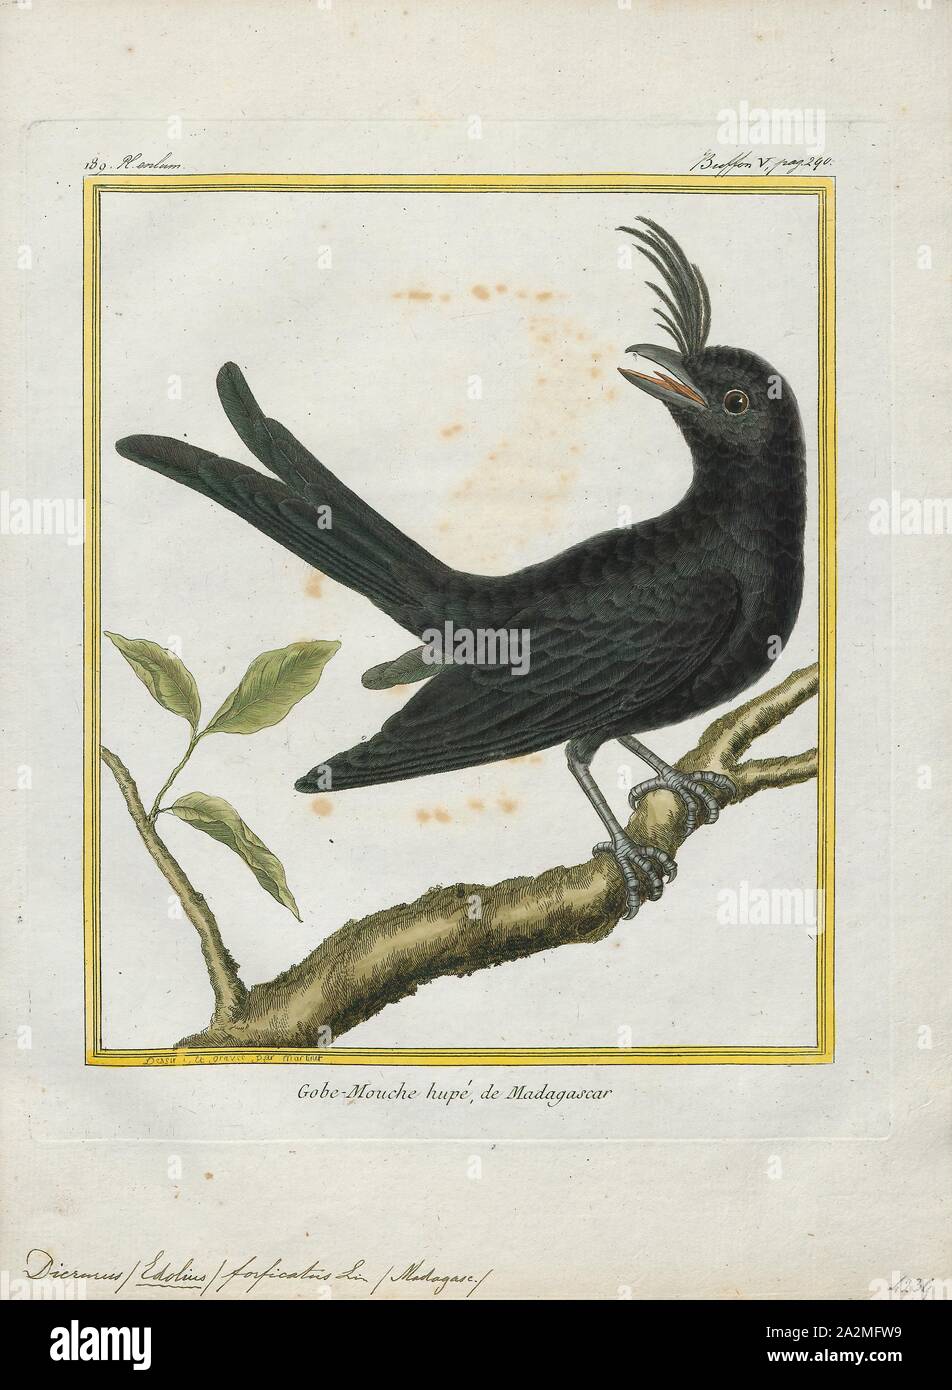 Dicrurus forficatus, Print, The crested drongo (Dicrurus forficatus) is a passerine bird in the family Dicruridae. It is black with a bluish-green sheen, a distinctive crest on the forehead and a forked tail. There are two subspecies; D. f. forficatus is endemic to Madagascar and D. f. potior, which is larger, is found on the Comoro Islands. Its habitat is lowland forests, both dry and humid, and open savannah country. It is a common bird and the IUCN has listed it as 'least concern'., 1700-1880 Stock Photo